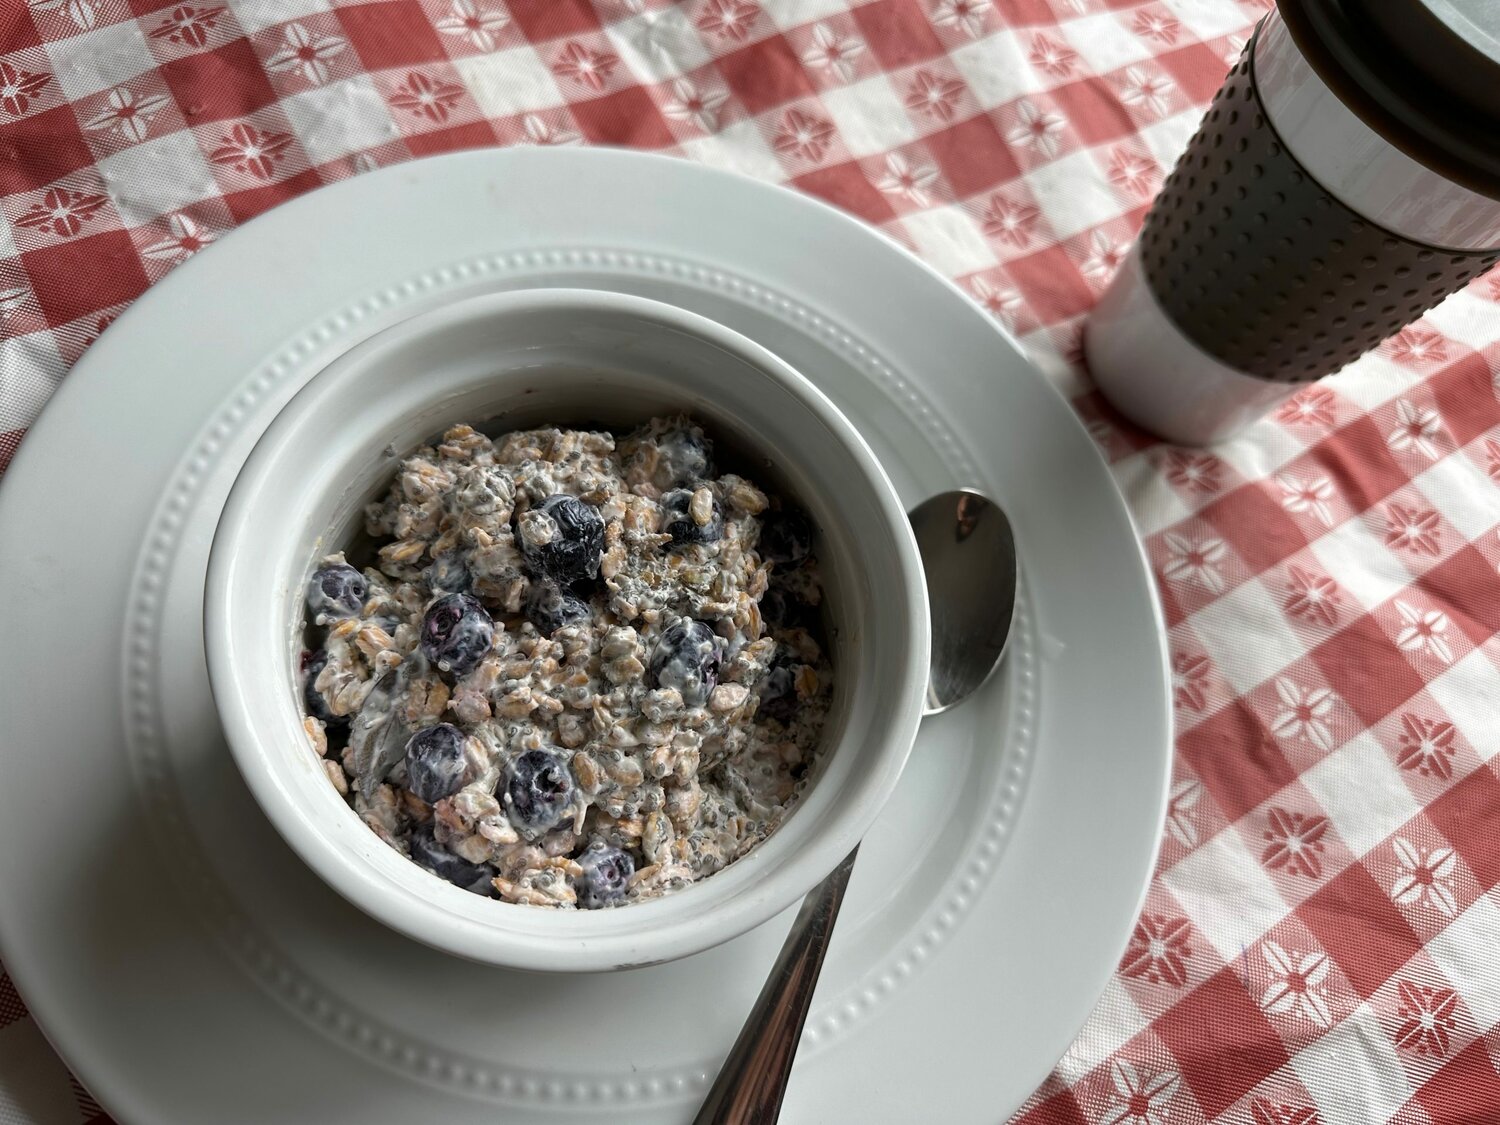 Overnight grains are a trendy breakfast meal that’s easy to make — as long as you have the patience to wait until morning.